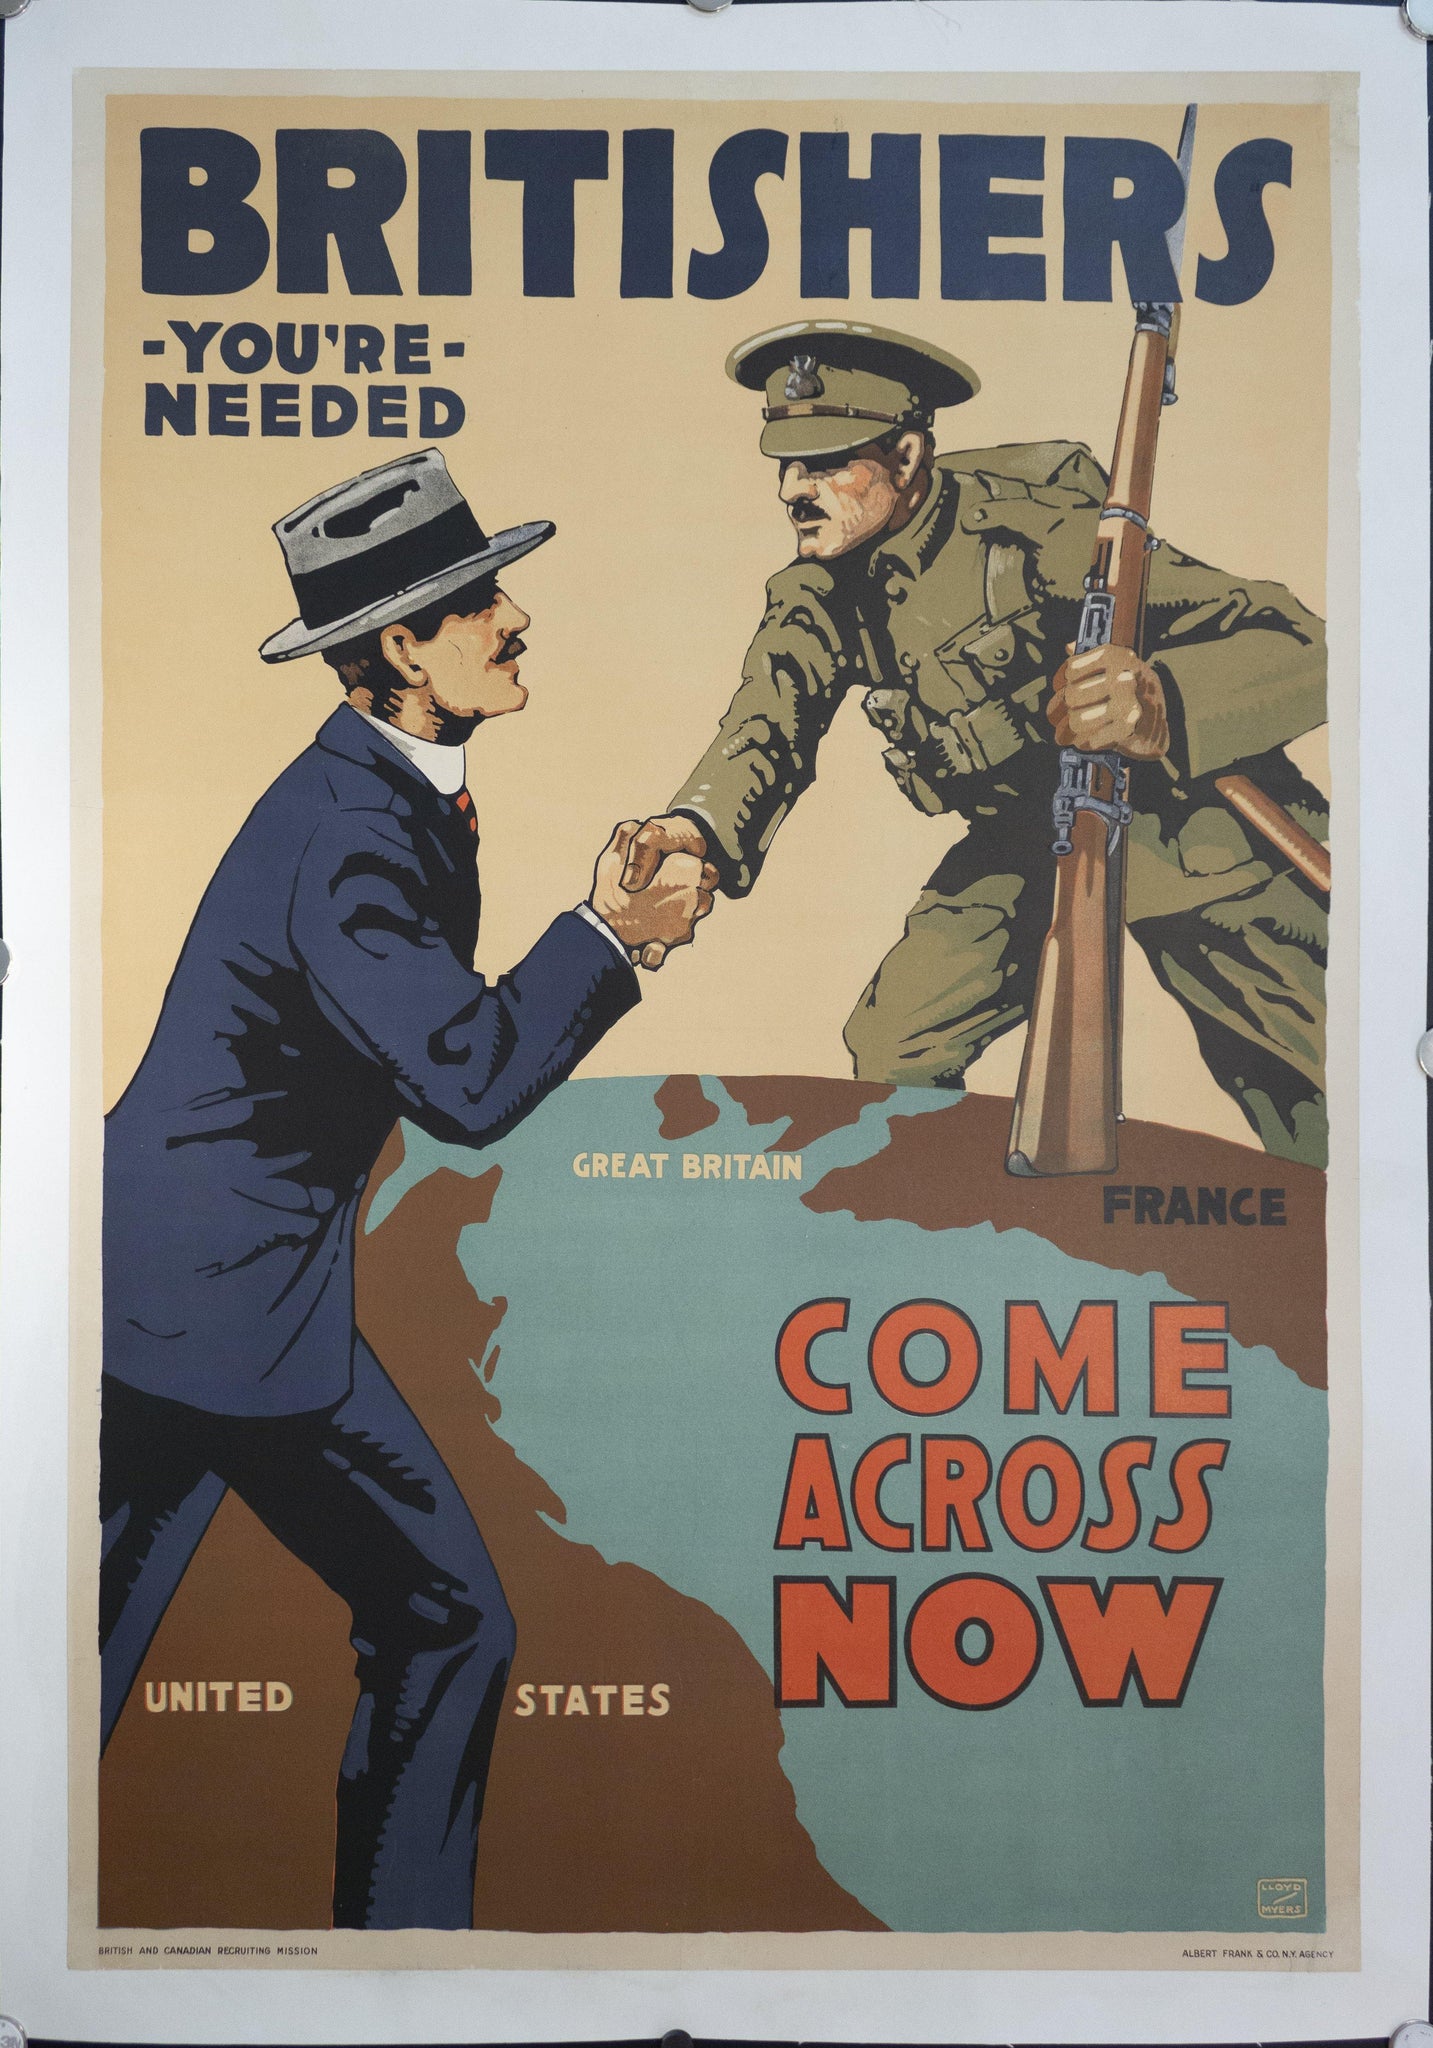 1916 Britisher's You're Needed Come Across Now by Lloyd Myers - Golden Age Posters